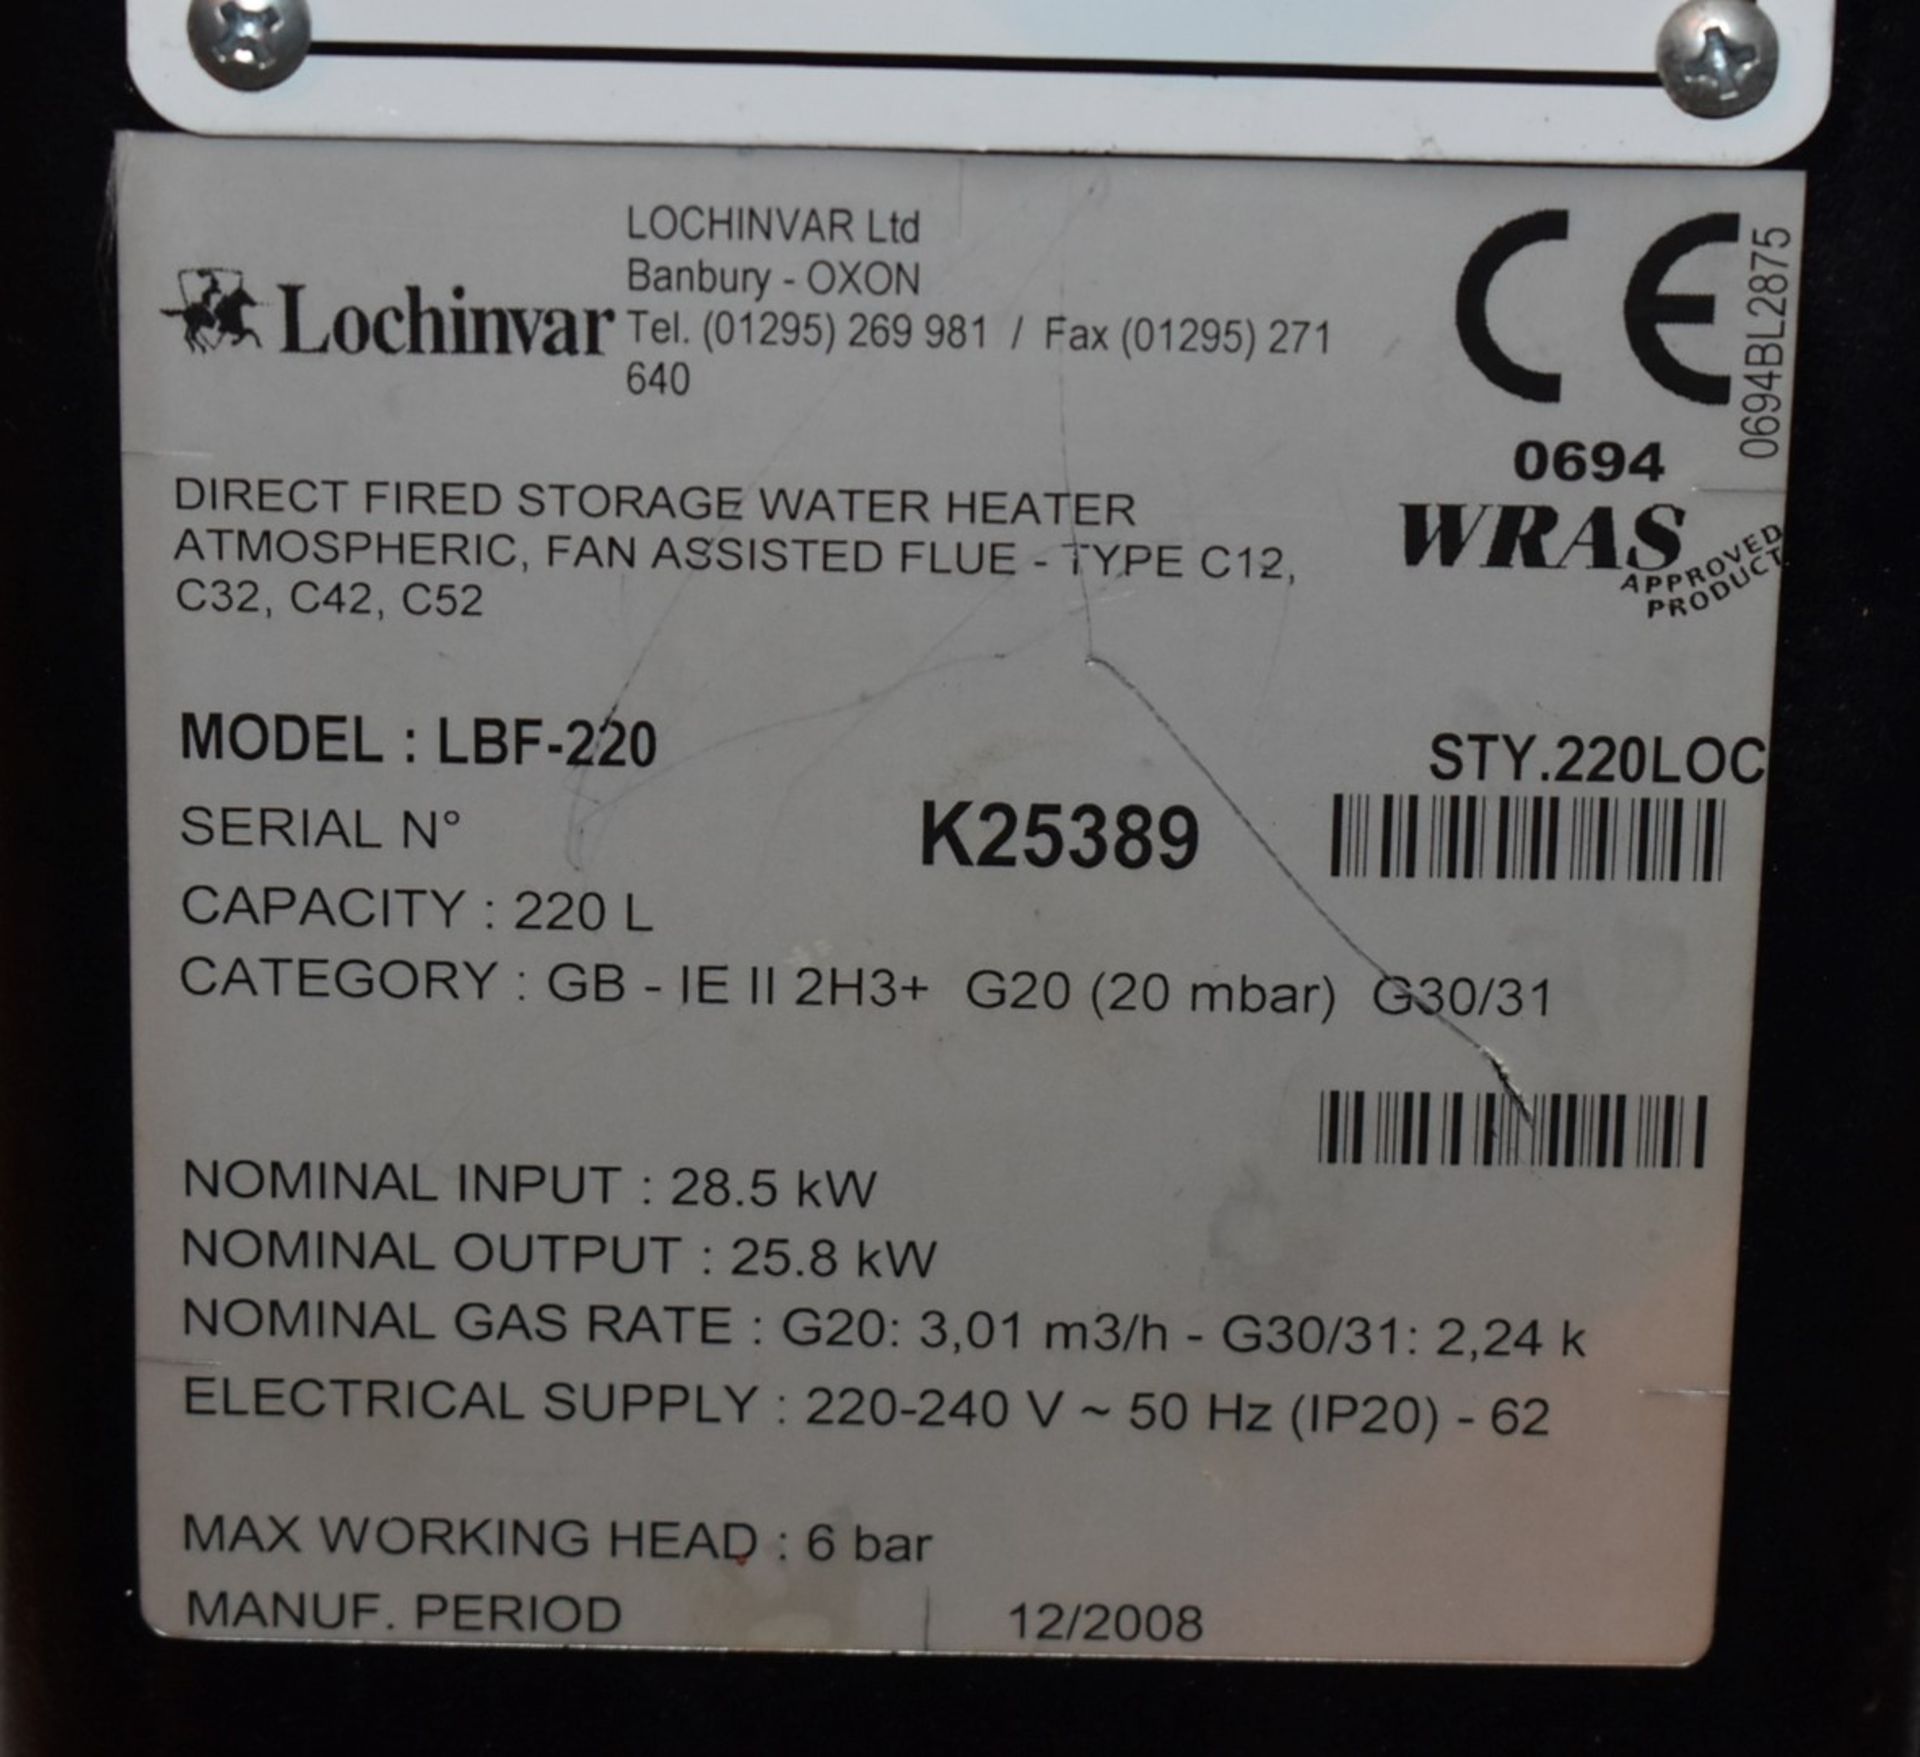 1 x Lochinvar High Efficiency Gas Fired 220L Storage Water Heater - Model LBF-220 - Ref: WH2-144 H5D - Image 9 of 19